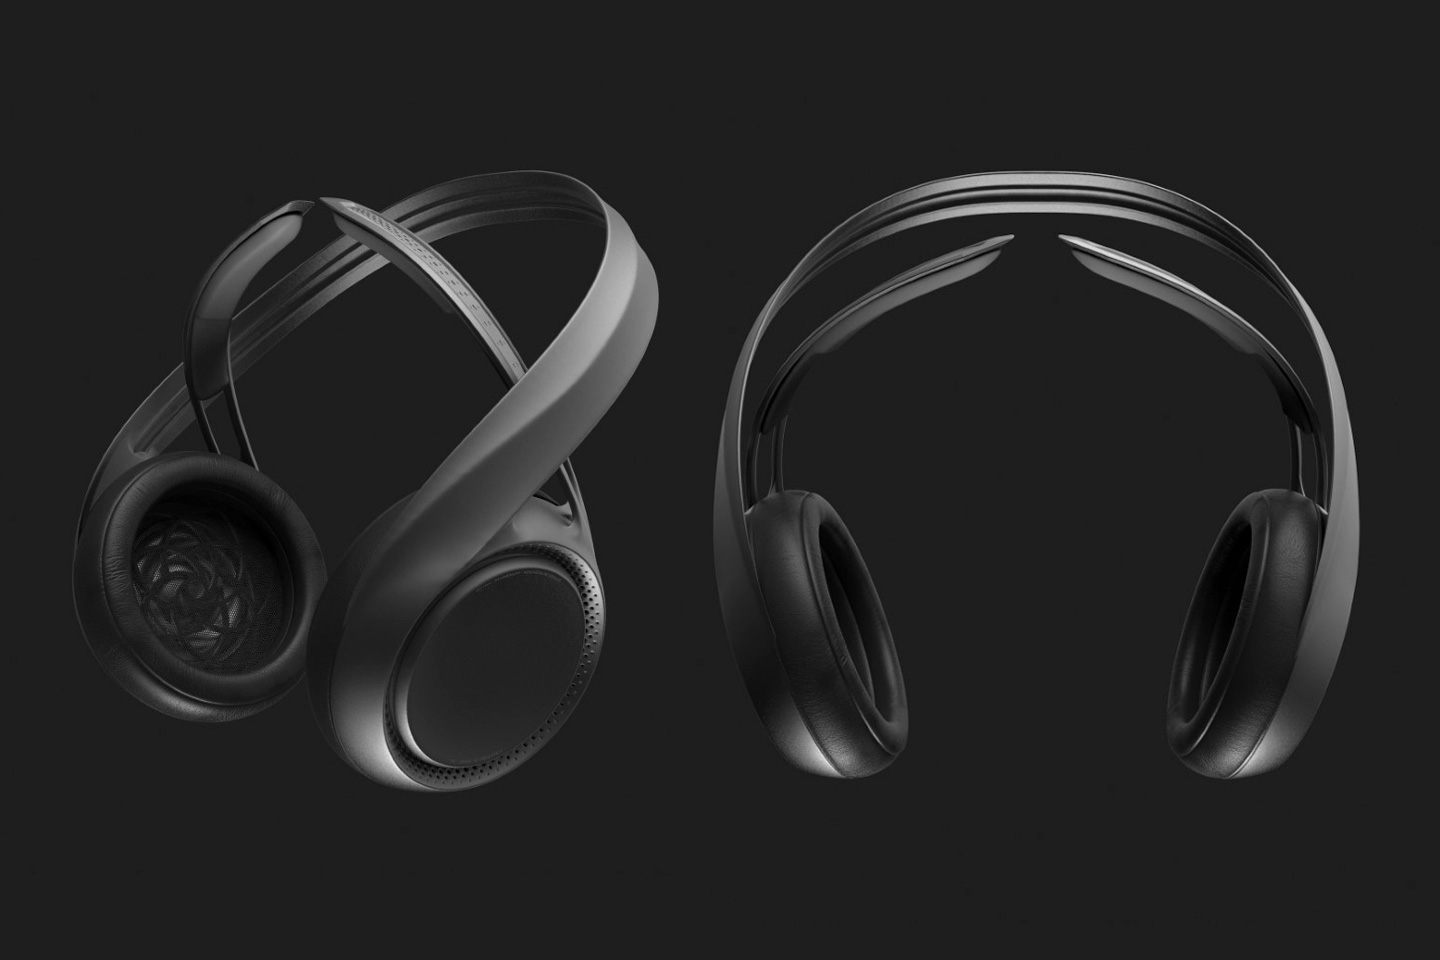 #The Aeolus Headphone’s dual headband design lets it rest more comfortably on your head